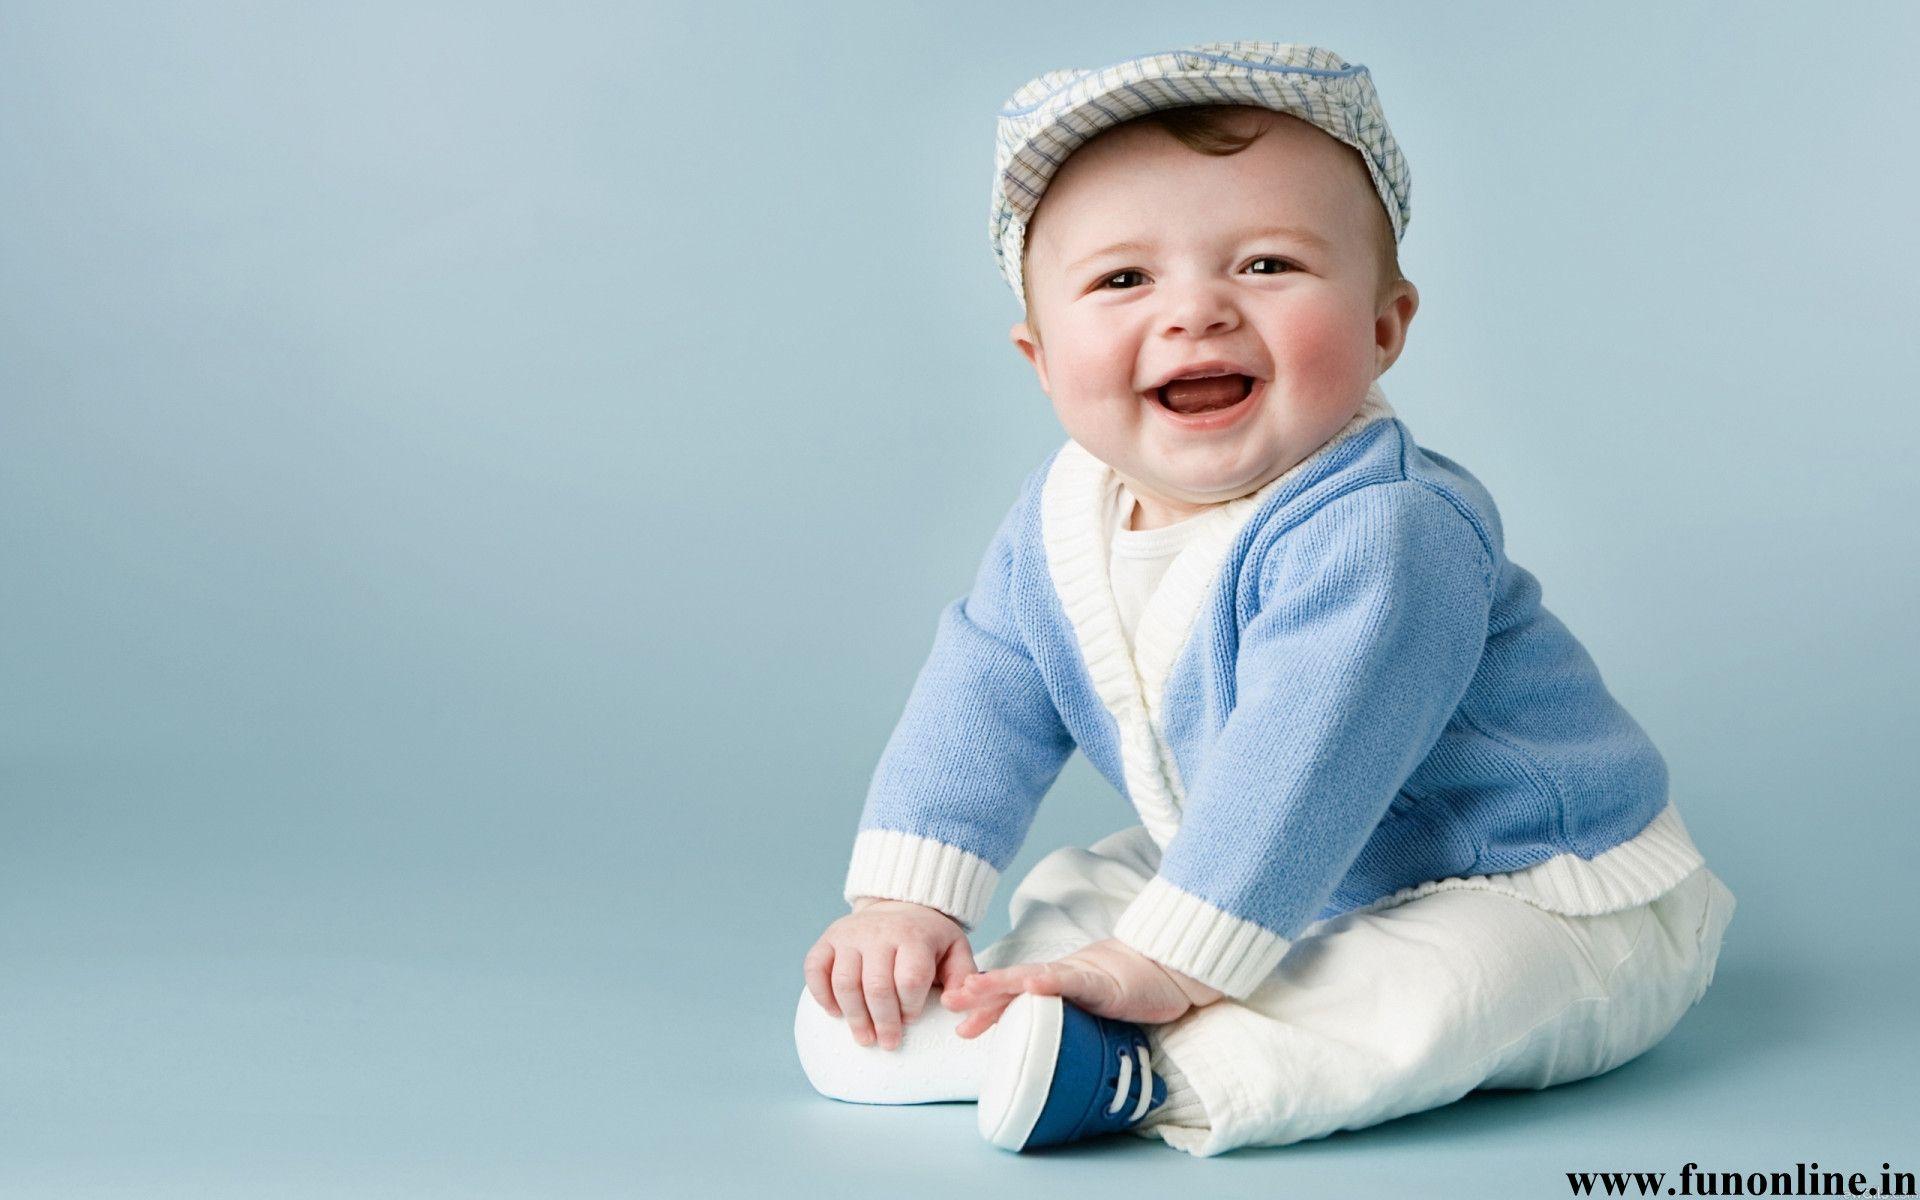 Smiling Baby Wallpaper, Download Pretty and Smiling Babies HD